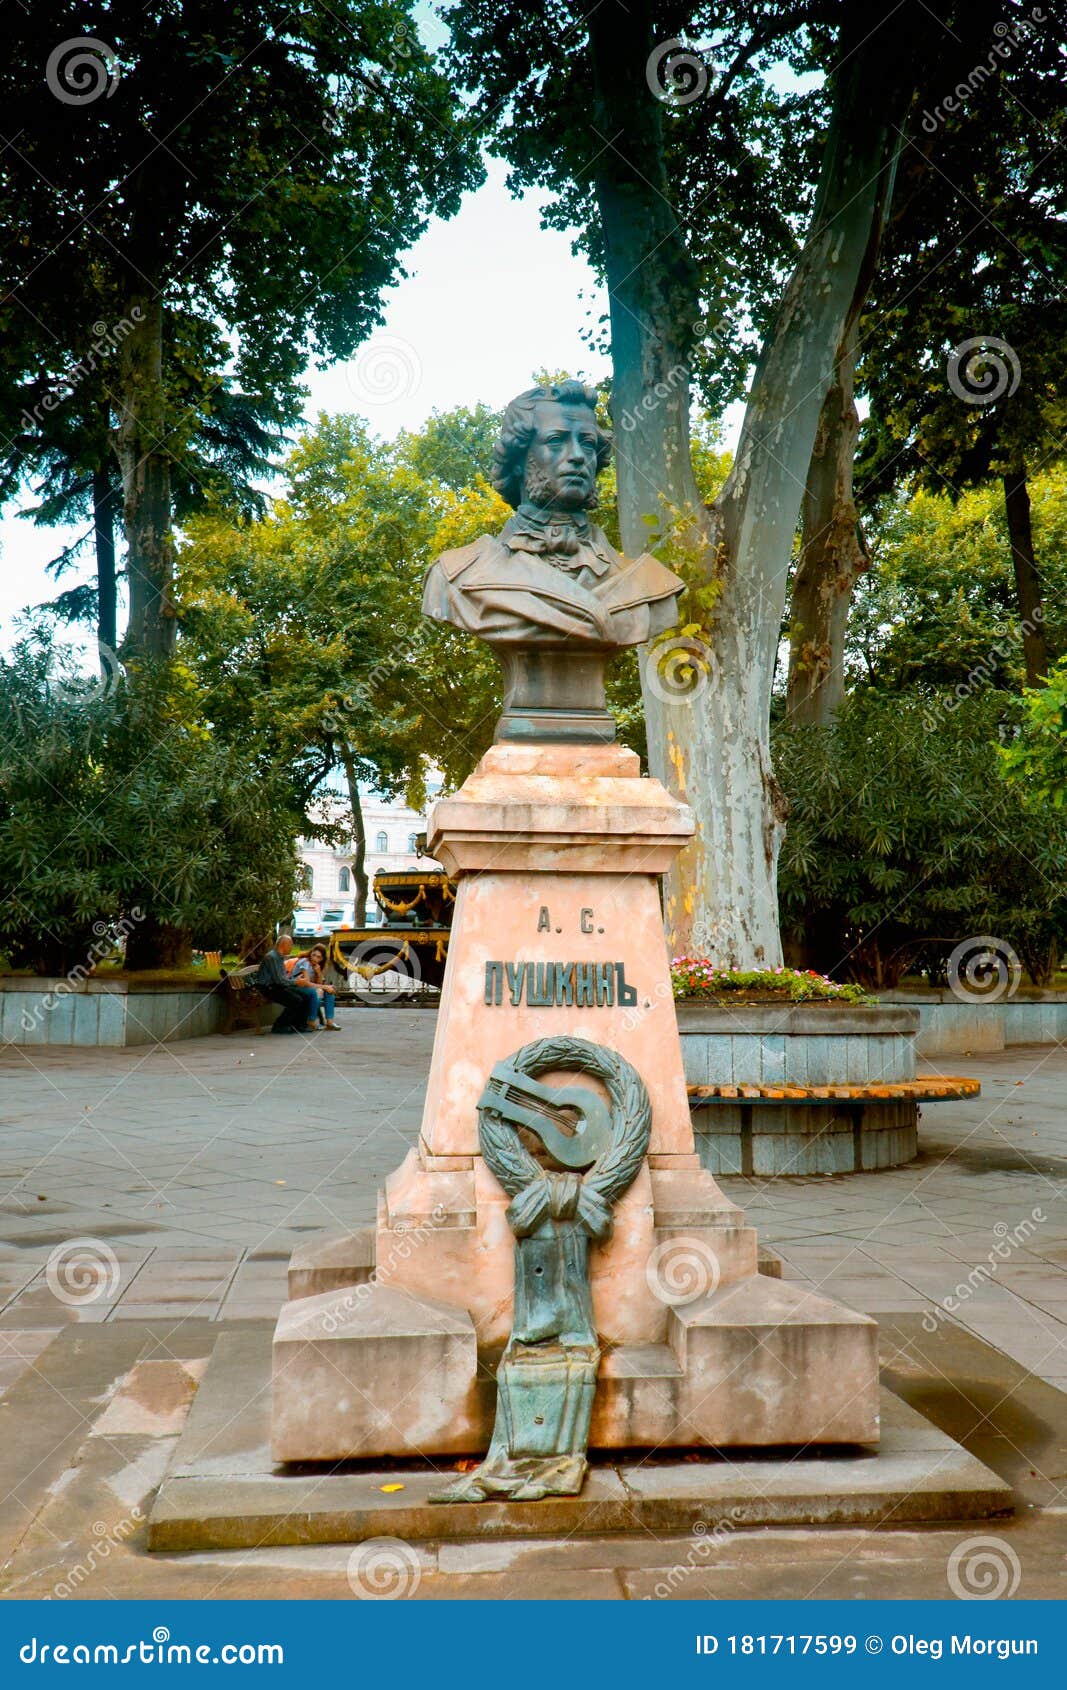 saint Bibliography Manifest Monument To Poet Alexander Pushkin Near Freedom Square in Tbilisi, Georgia  Editorial Stock Image - Image of russian, outdoor: 181717599